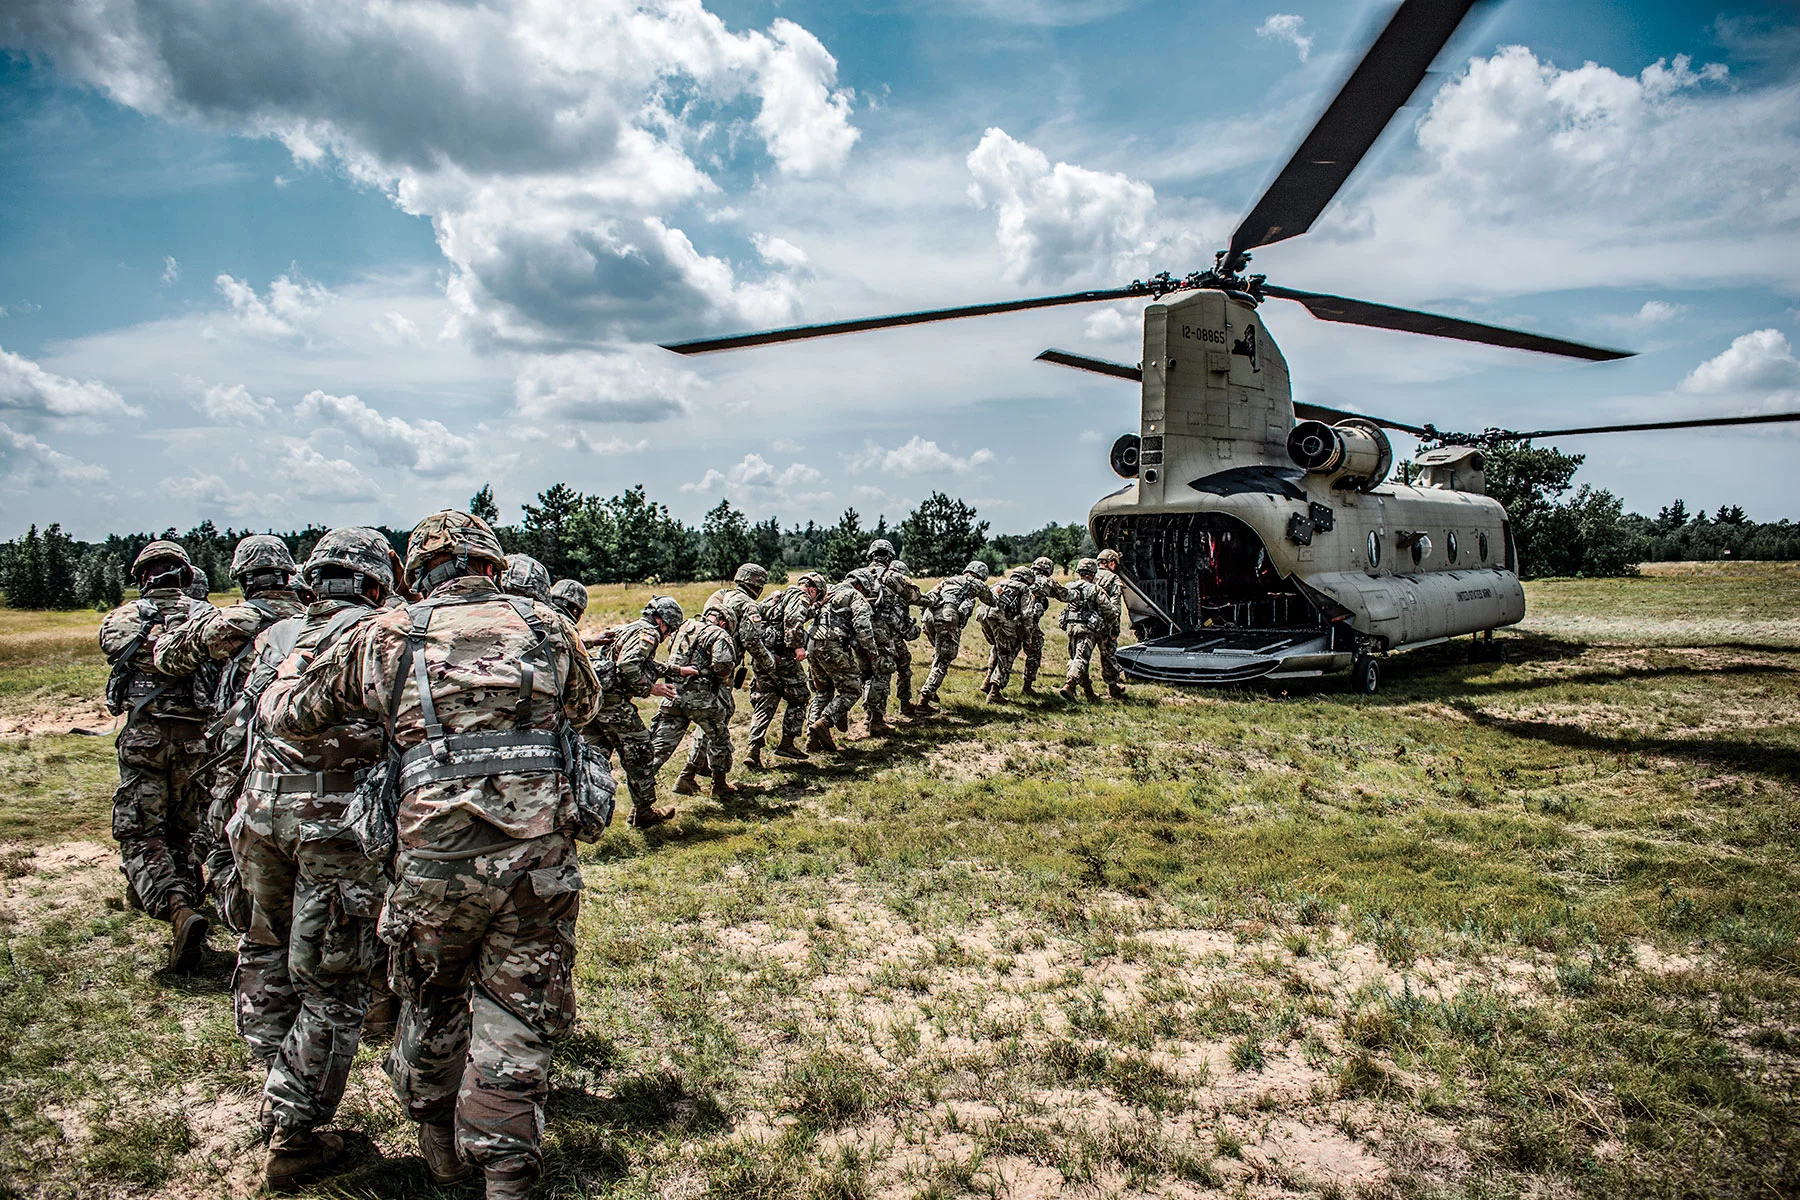 Soldiers walking into a military helicopter in a line.